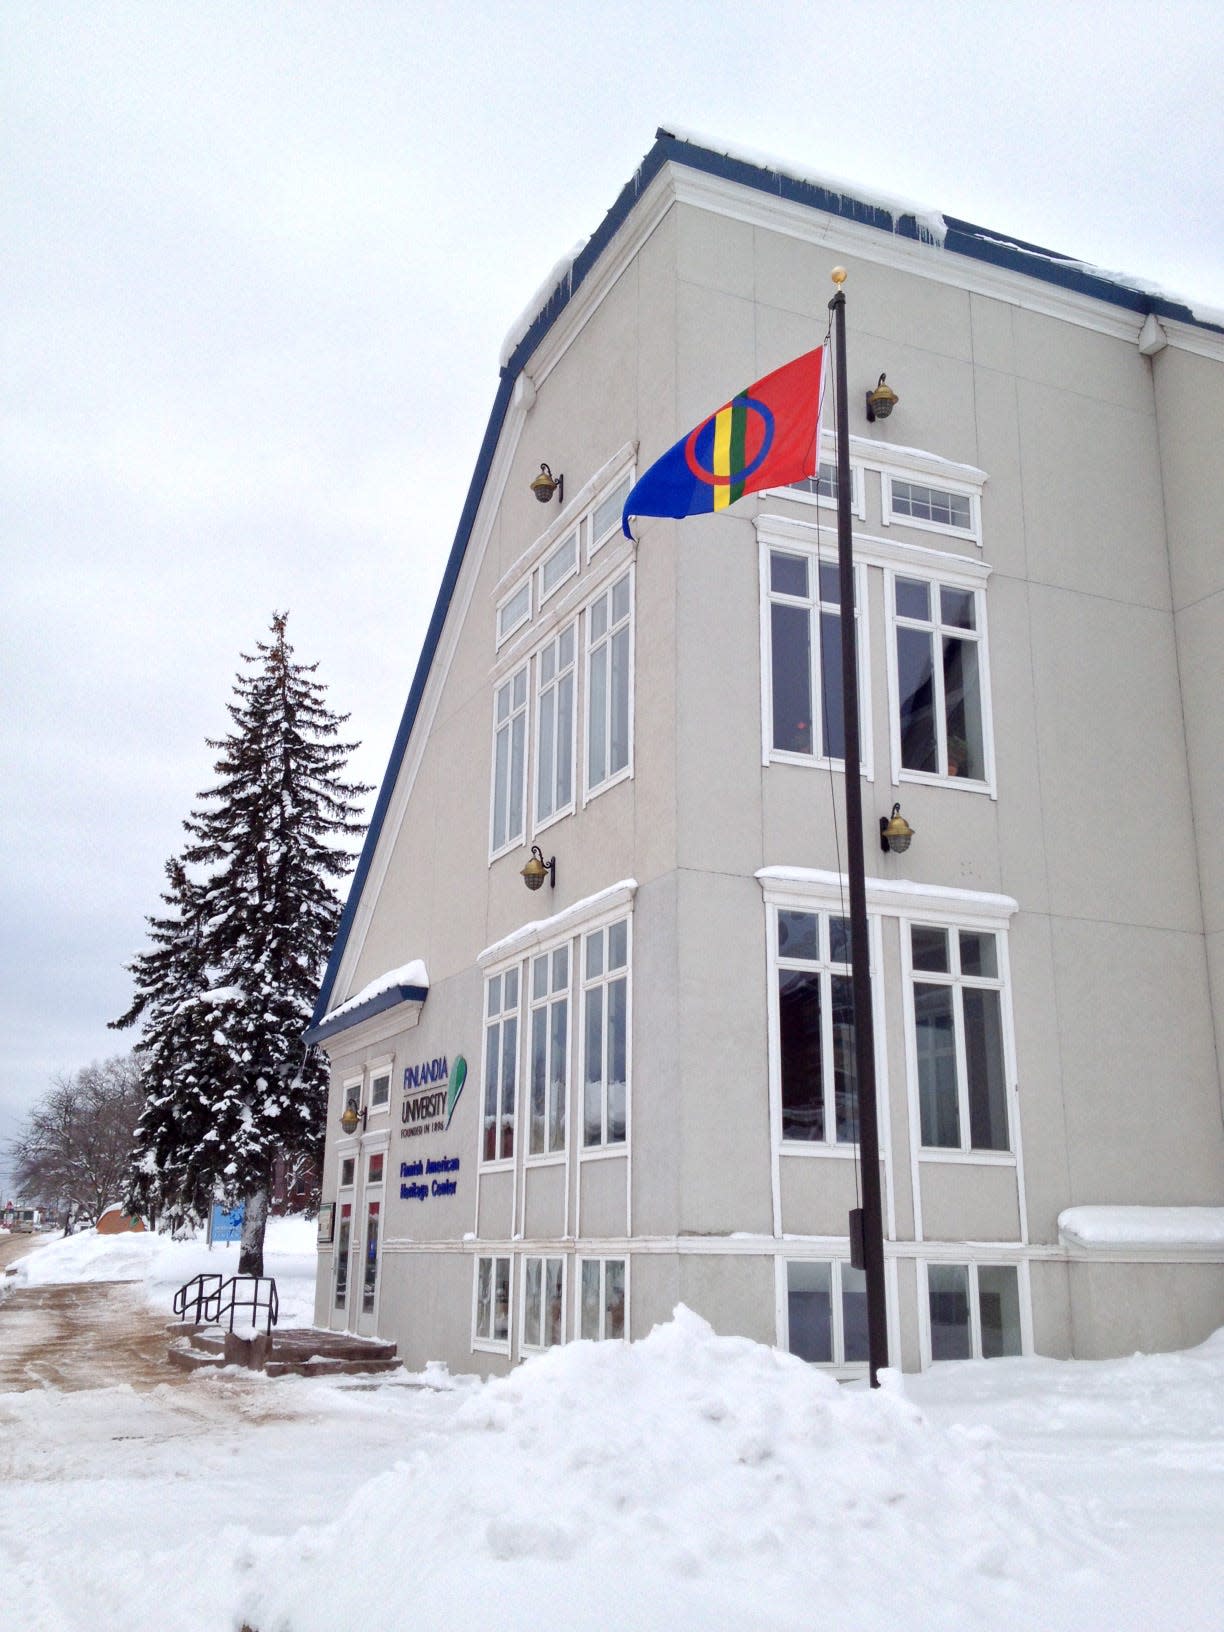 A Sámi flag flies outside Finlandia University in Hancock, in celebration of Sámi National Day. After recently announcing it will close its doors to students after 120 years of service as an institution of higher learning, Finlandia University in Michigan’s Upper Peninsula has come to an agreement with Adrian College that offers direct, guaranteed admission to all current Finlandia University students who are in good standing.